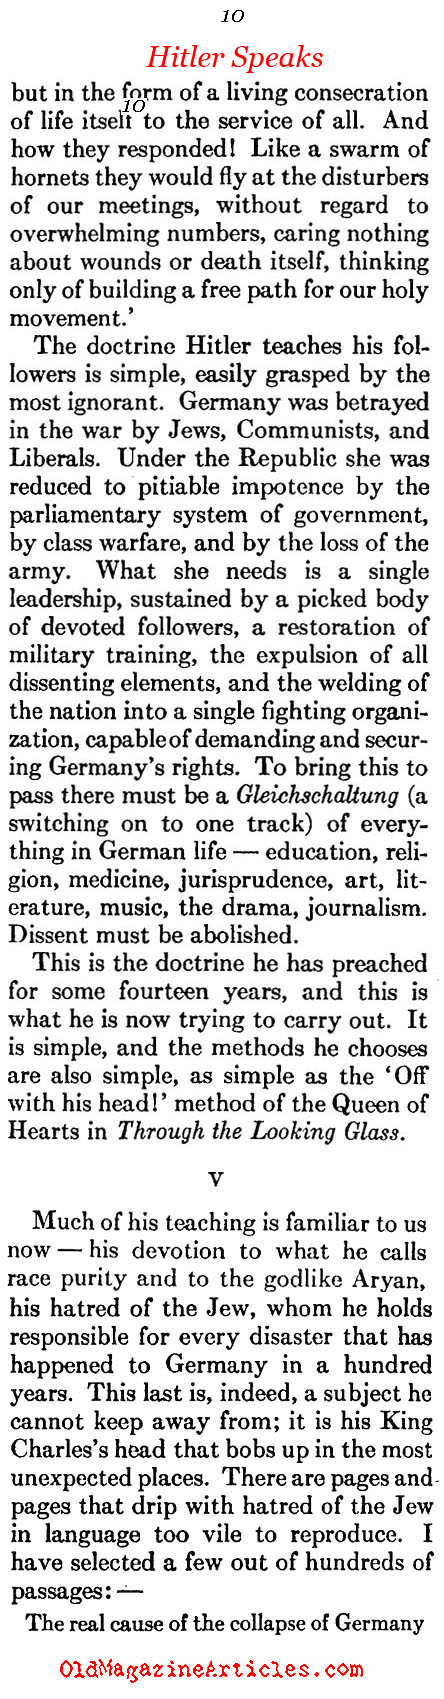 Hitler Gets a Bad Review (Atlantic Monthly, 1933)